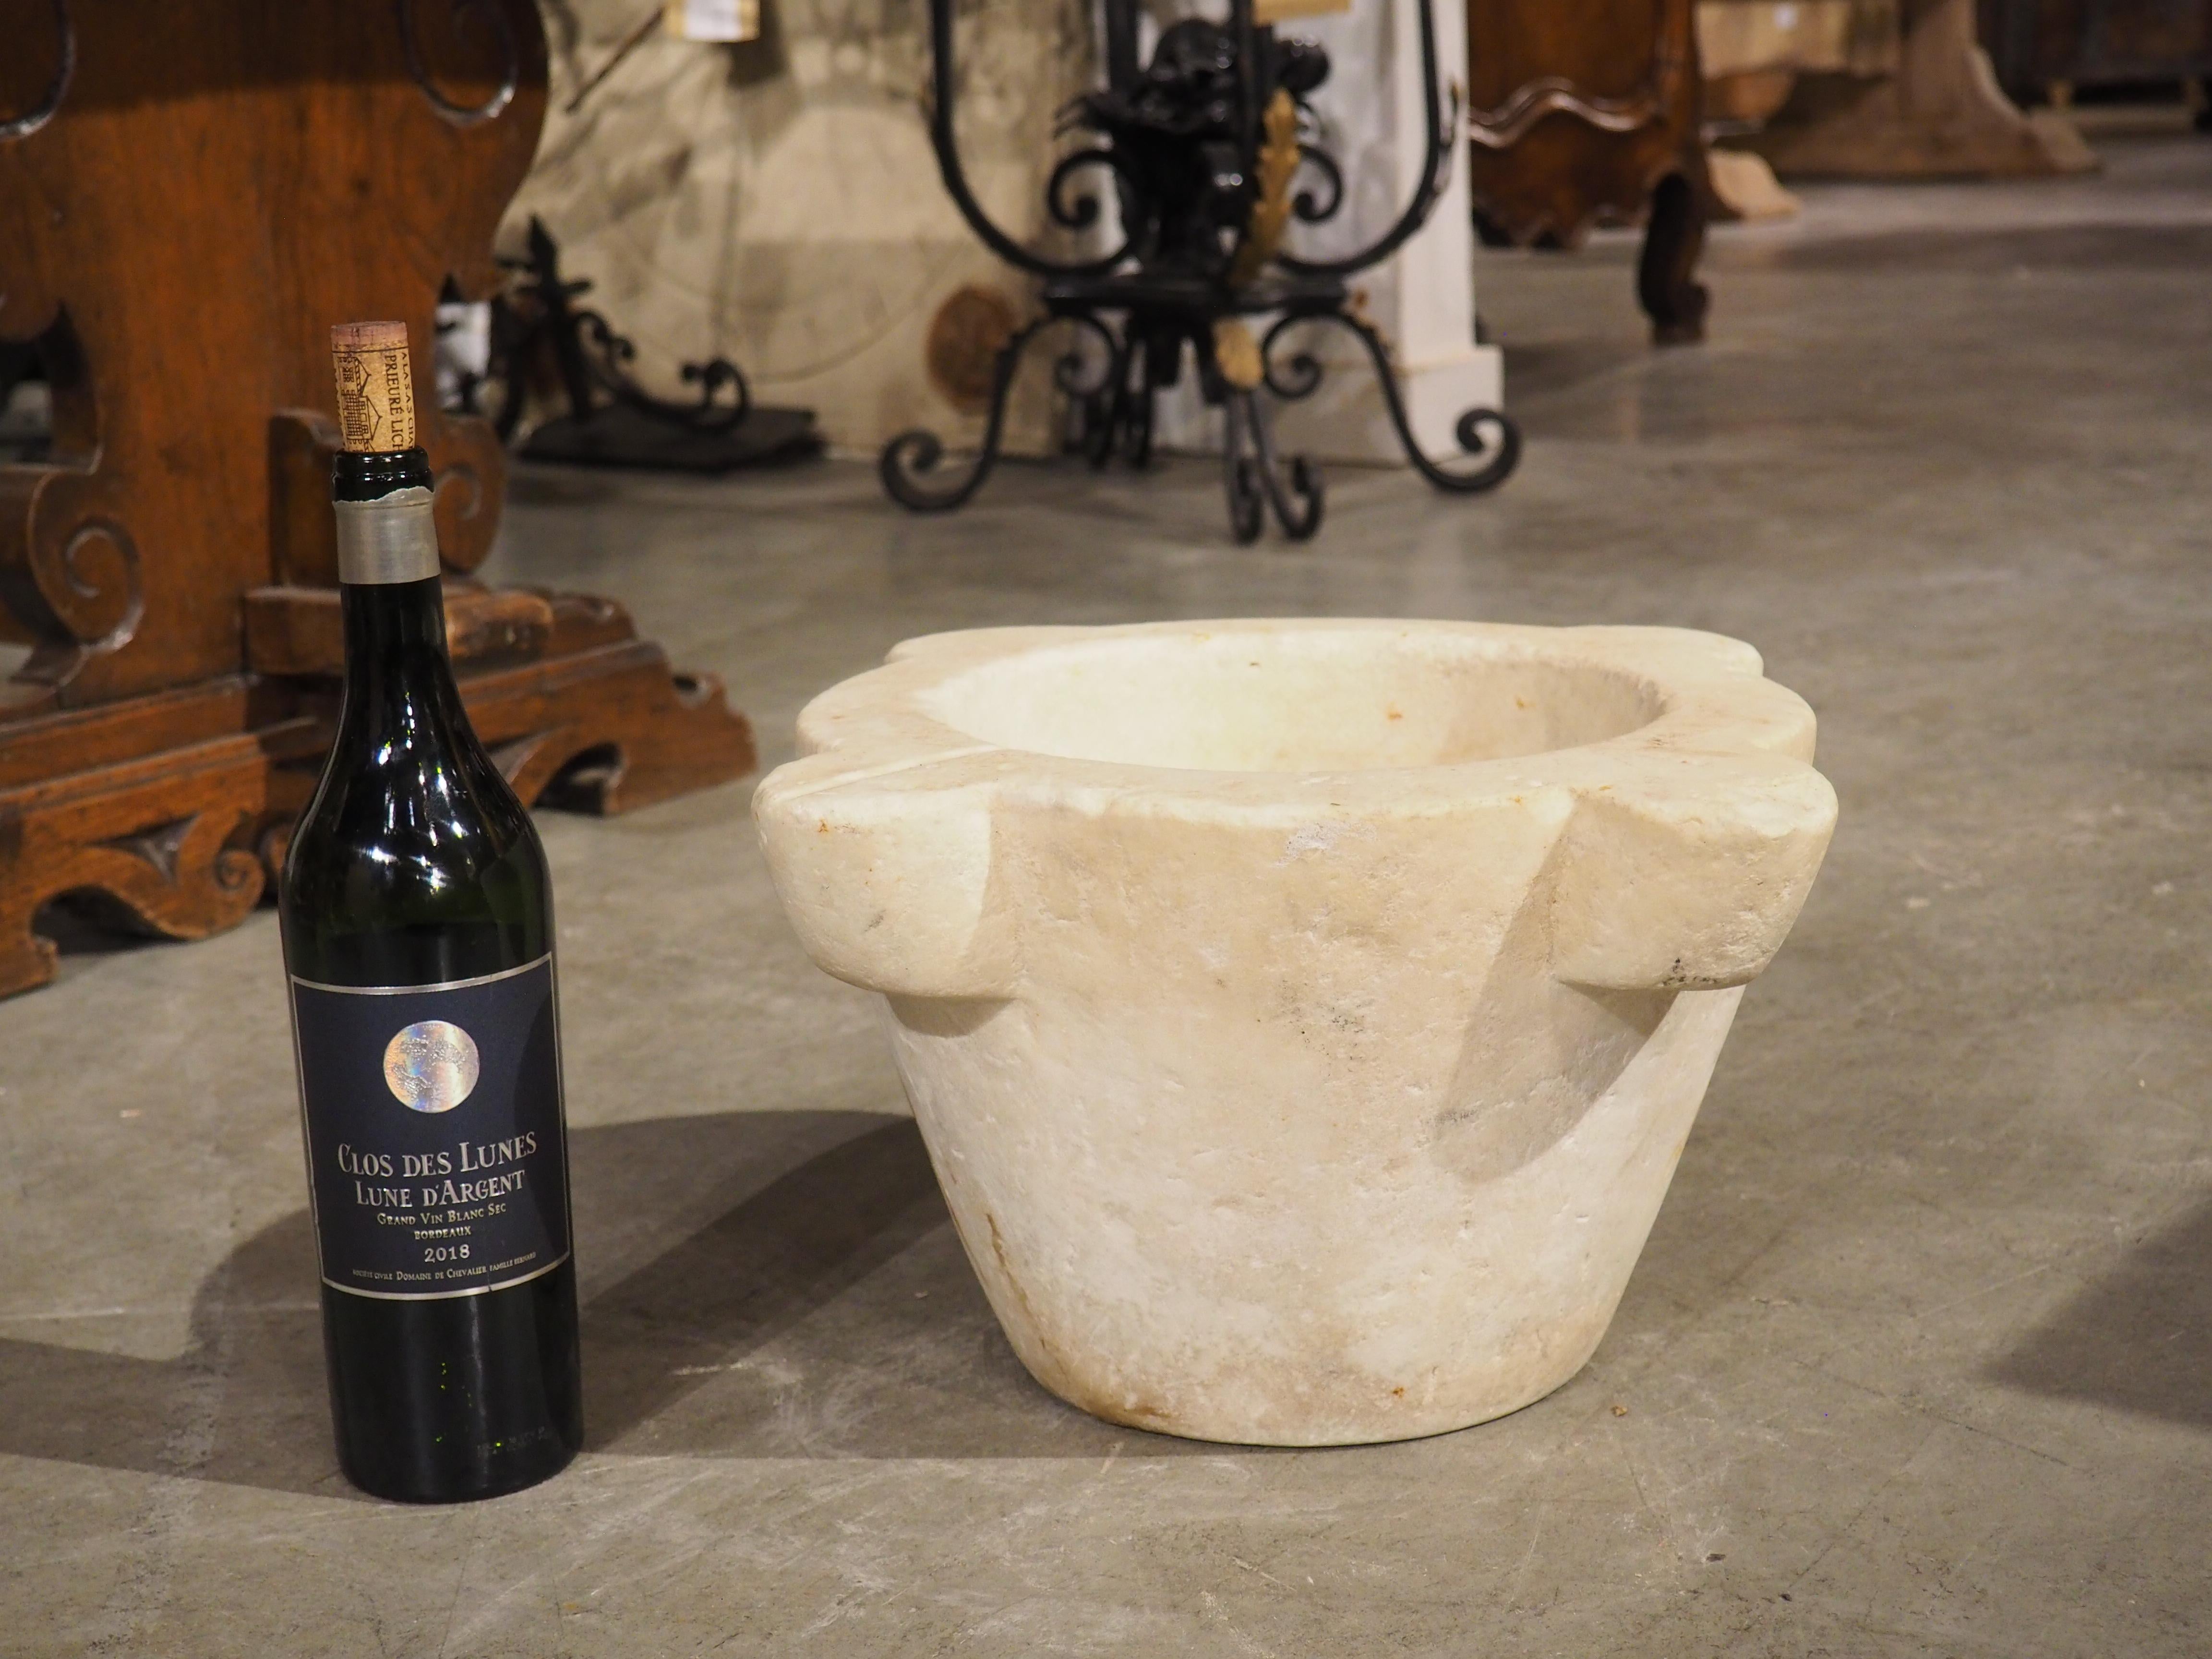 This very old hand-carved marble mortar dates to circa 1800 and originally came from France. The original use of a mortar (when paired with a pestle) was to aid pharmacists in crushing herbs into powder for medicinal purposes. In France, they were